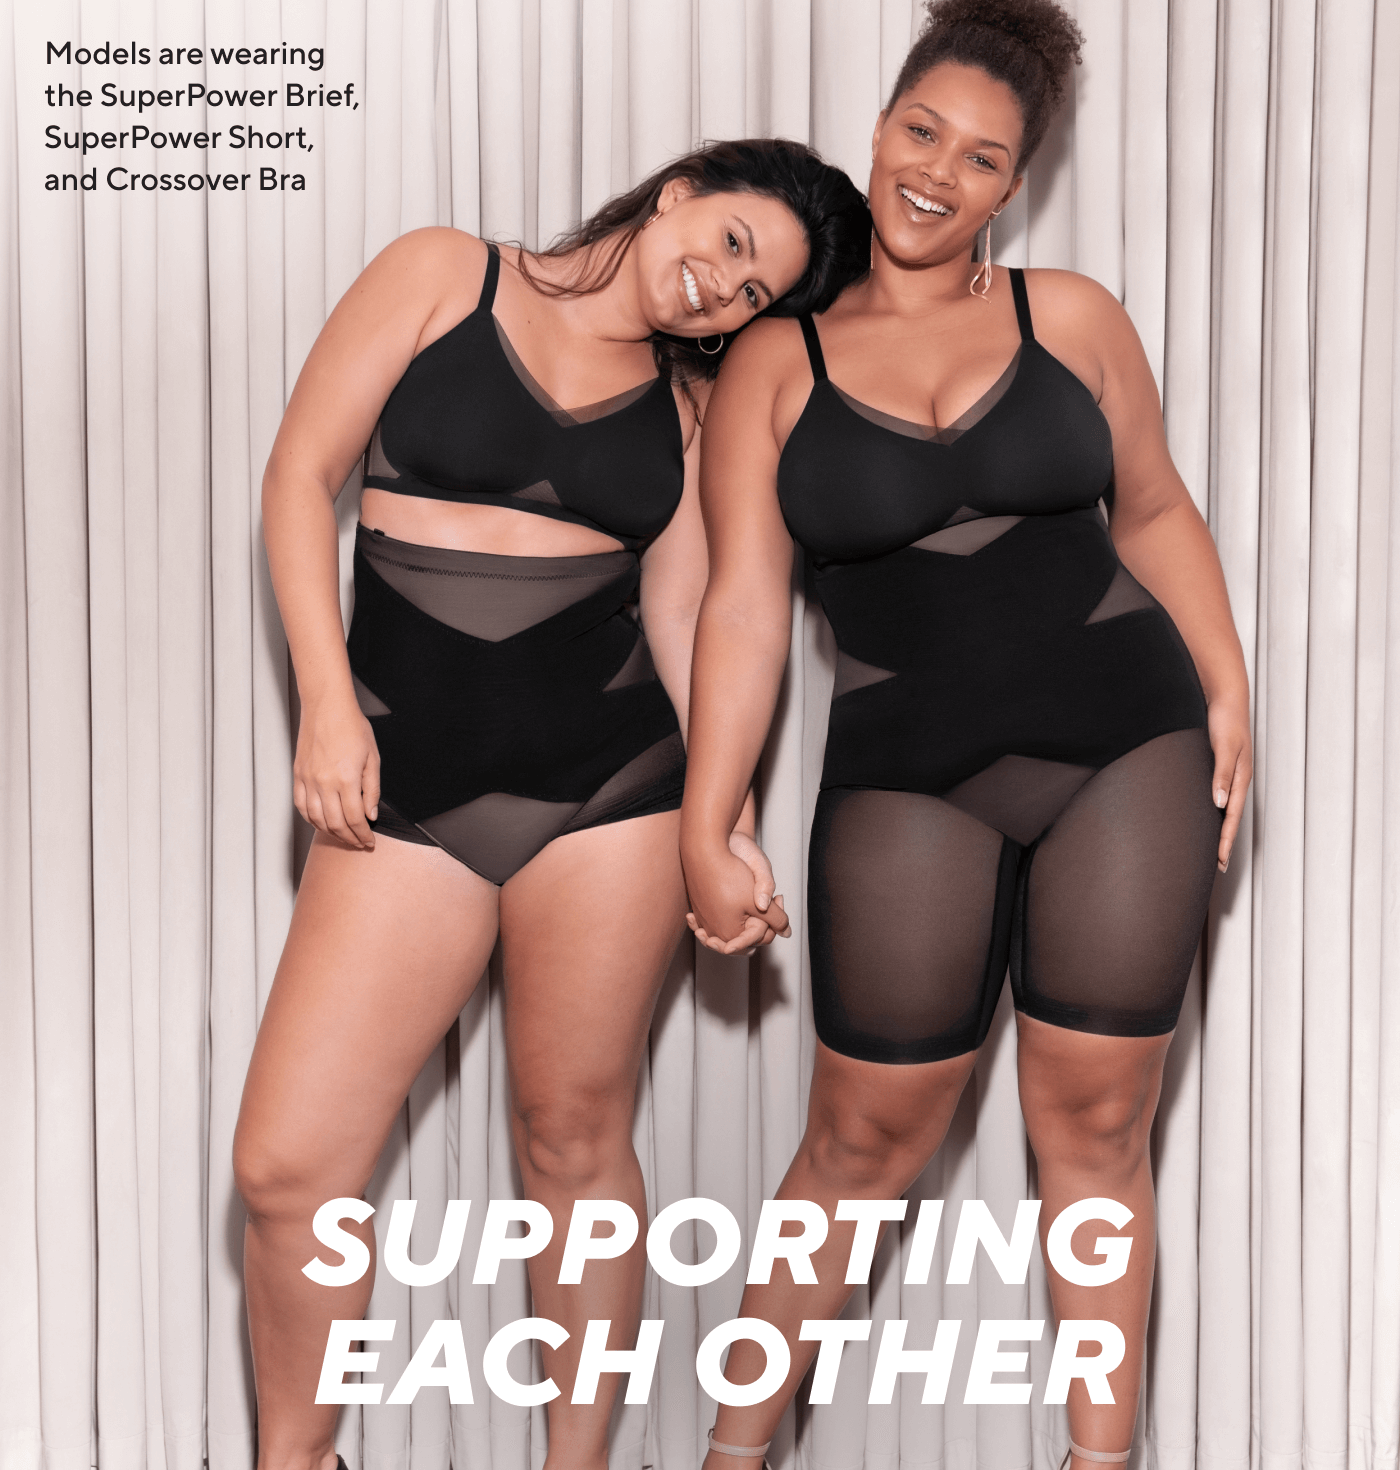 Sculptwear by HoneyLove: What real customers are saying about Honeylove